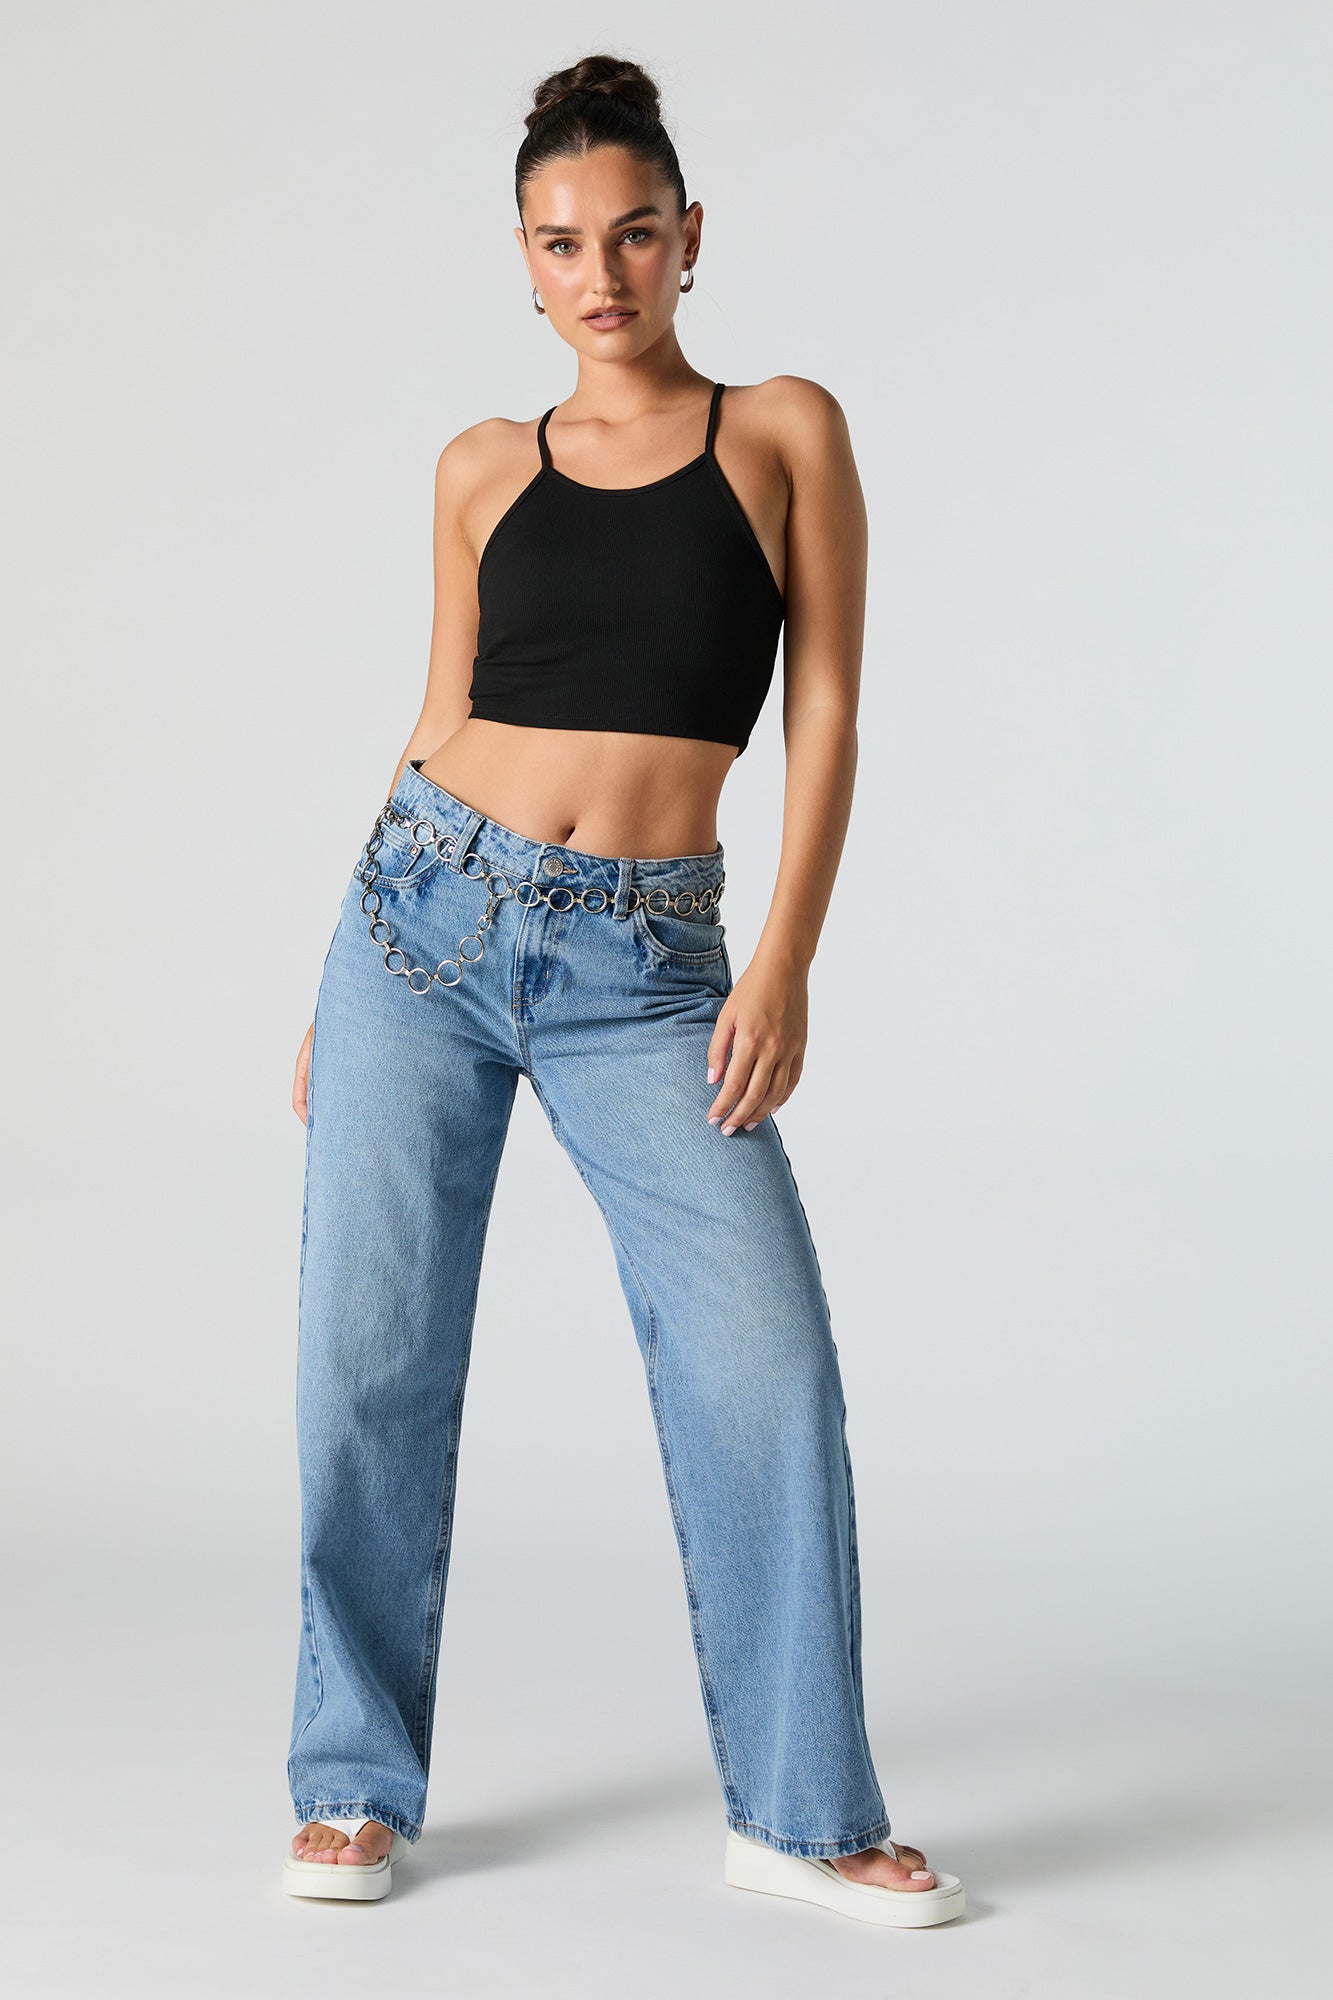 Ribbed Halter Cropped Cami